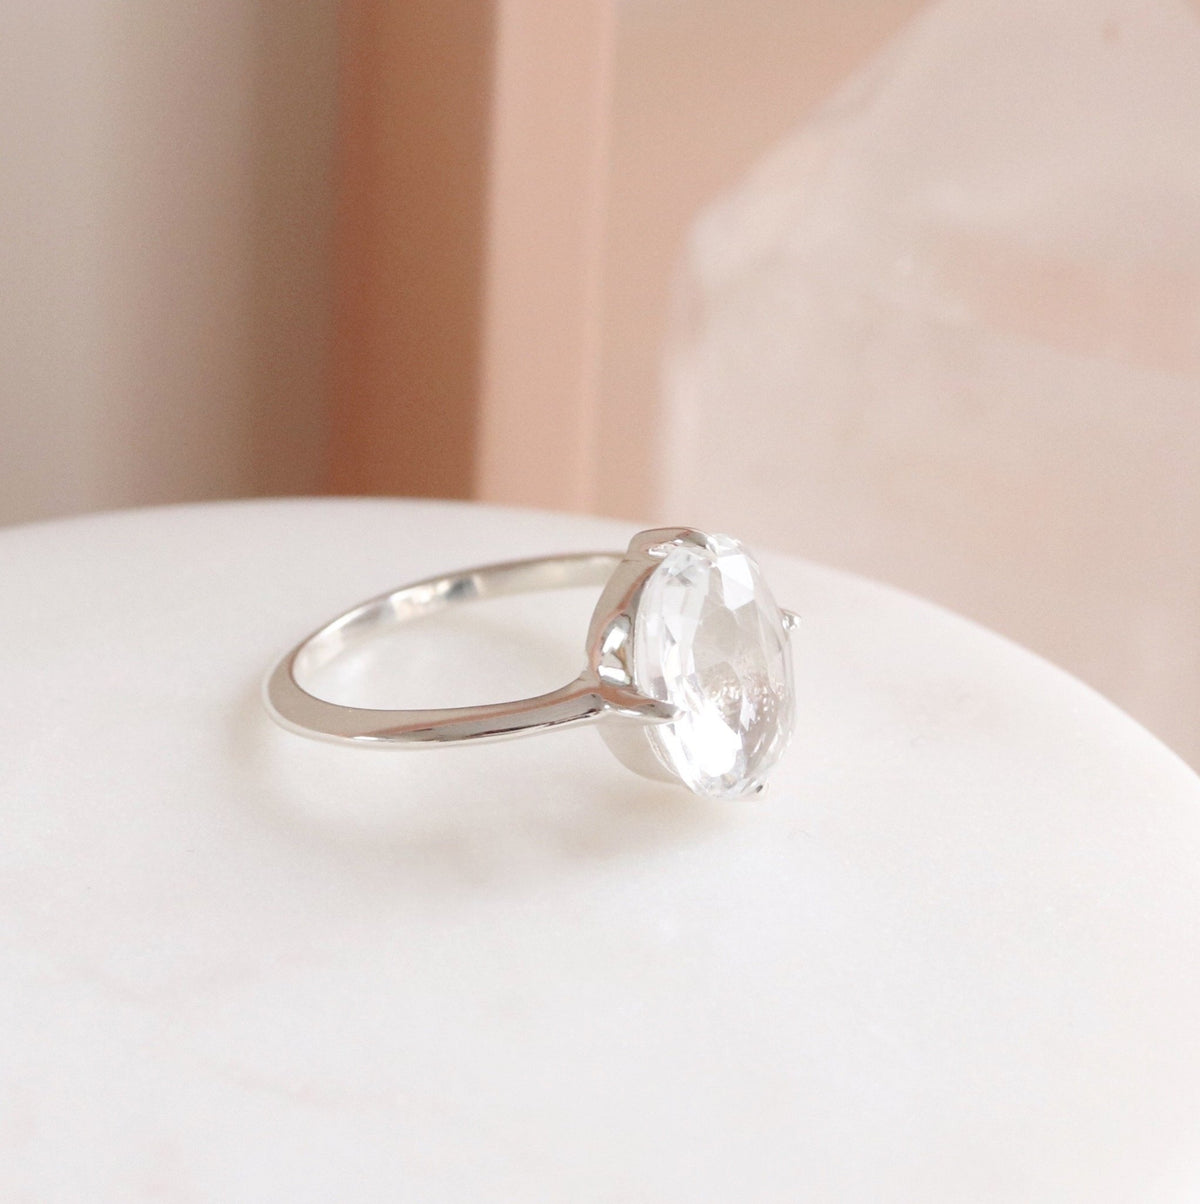 KIND OVAL SOLITAIRE RING - WHITE TOPAZ &amp; SILVER - SO PRETTY CARA COTTER